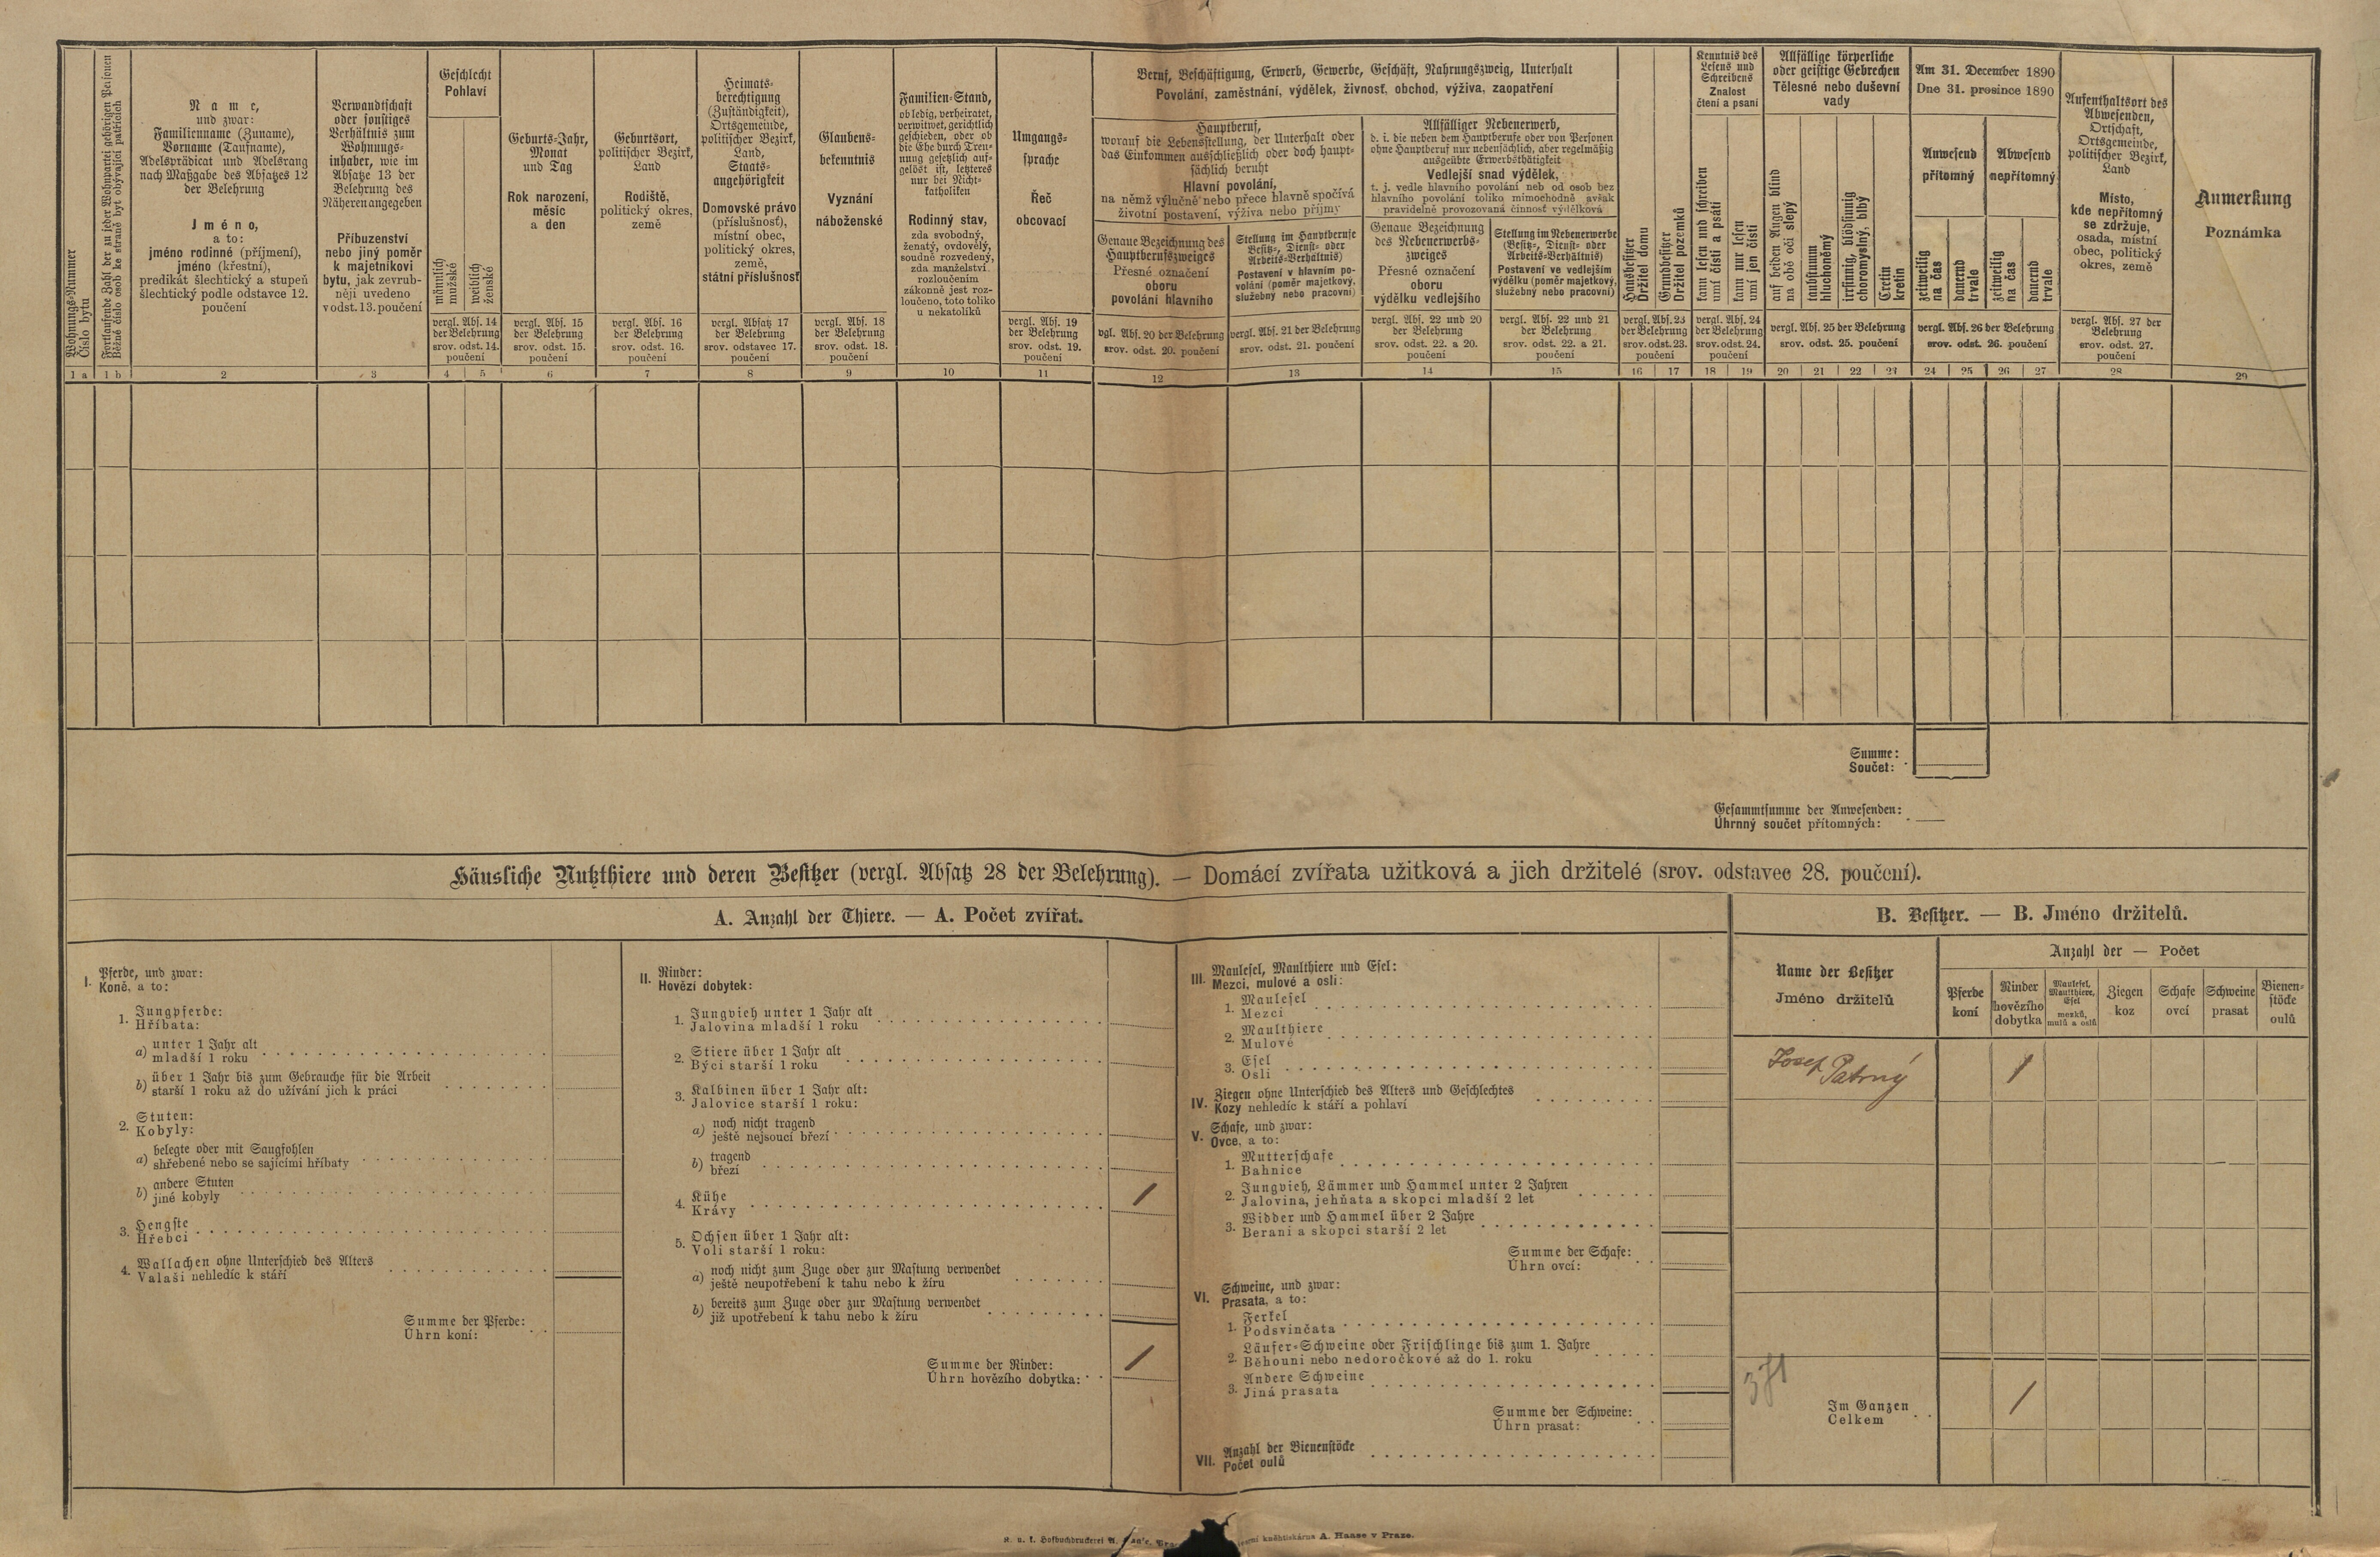 4. soap-kt_01159_census-1890-luby-cp061_0040